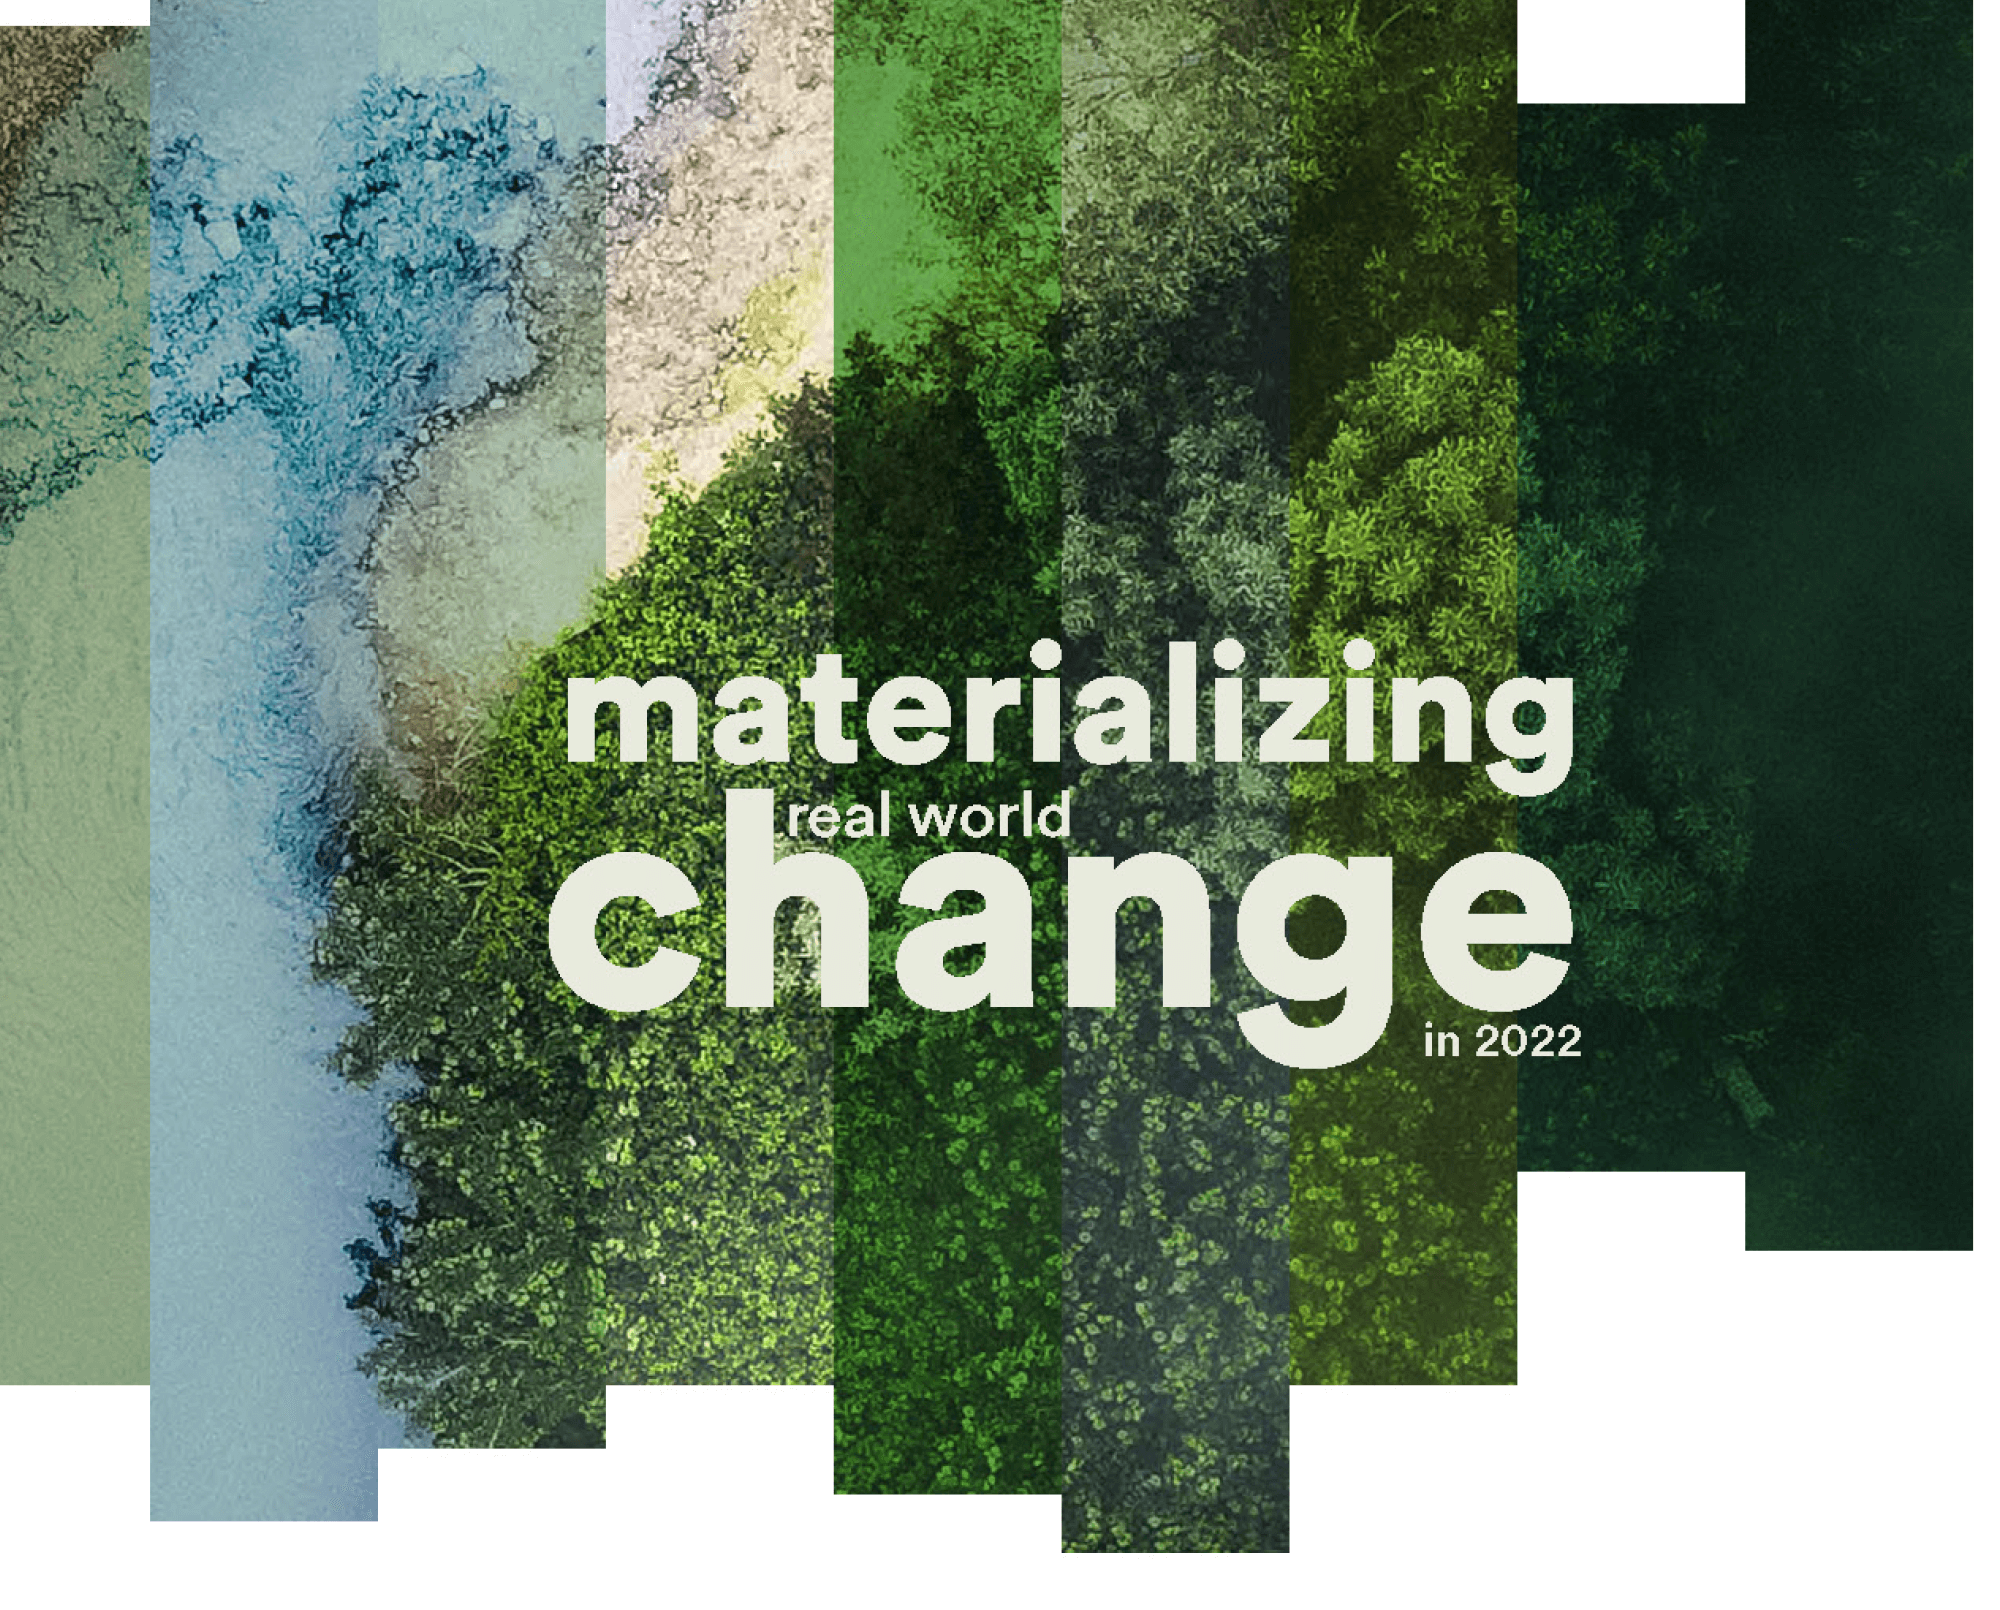 ClimateWorks’ 2022 Annual Report: Materializing Real-World Change in 2022